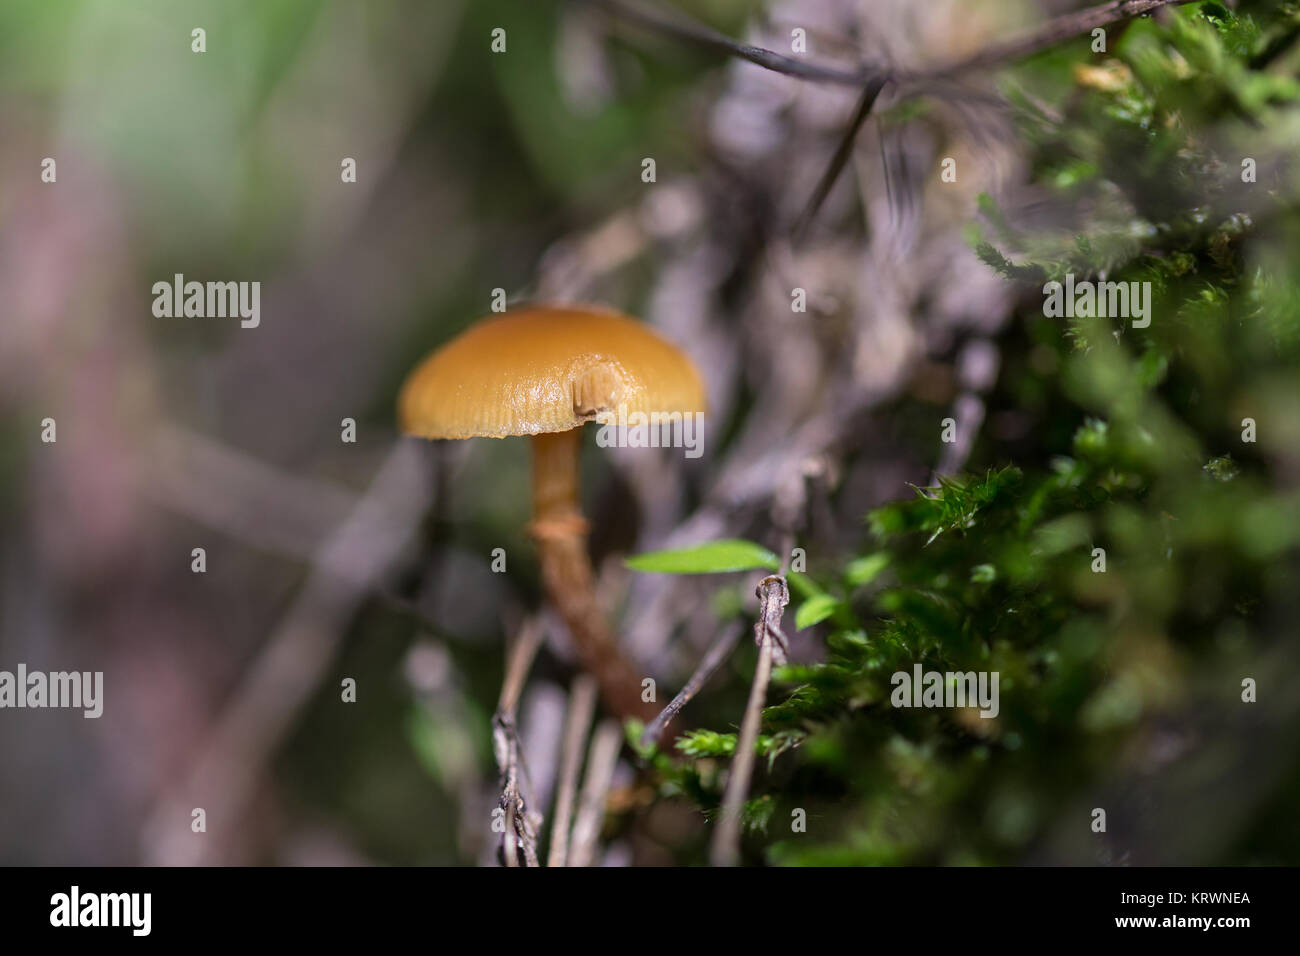 Small orange mushroom photographed in a forest of chestnut trees. Stock Photo